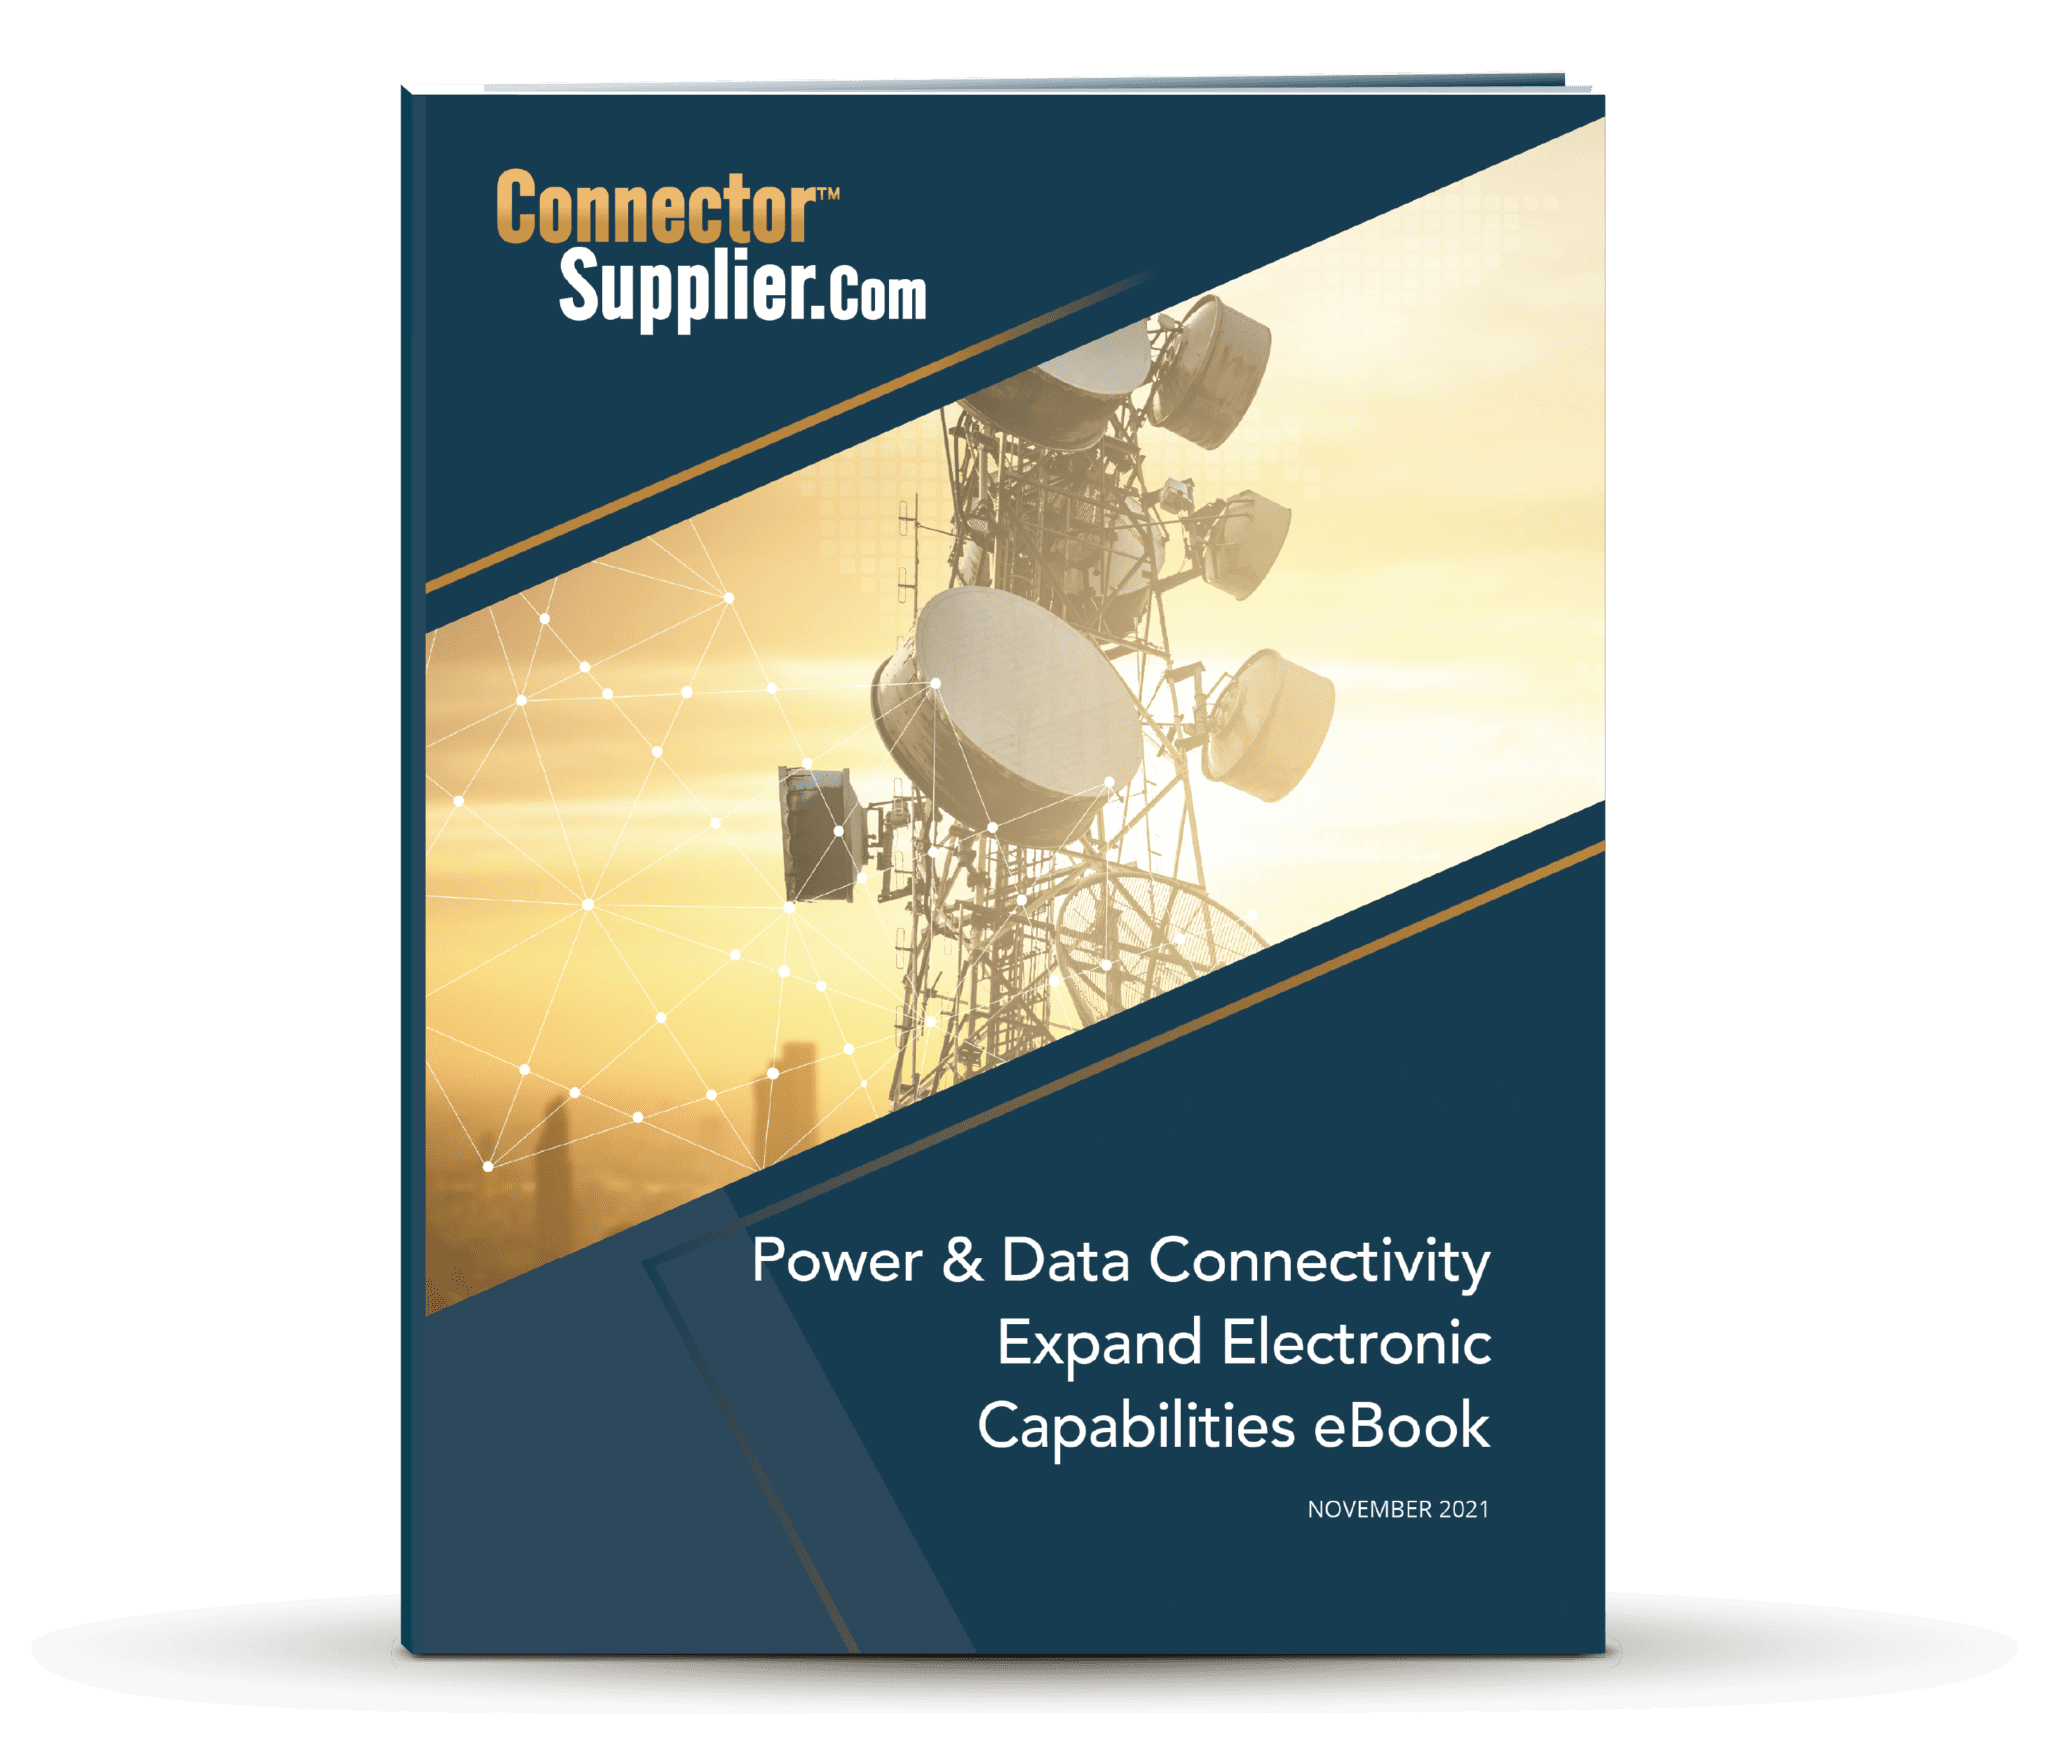 2021 Power & Data Connectivity eBook by Connector Supplier